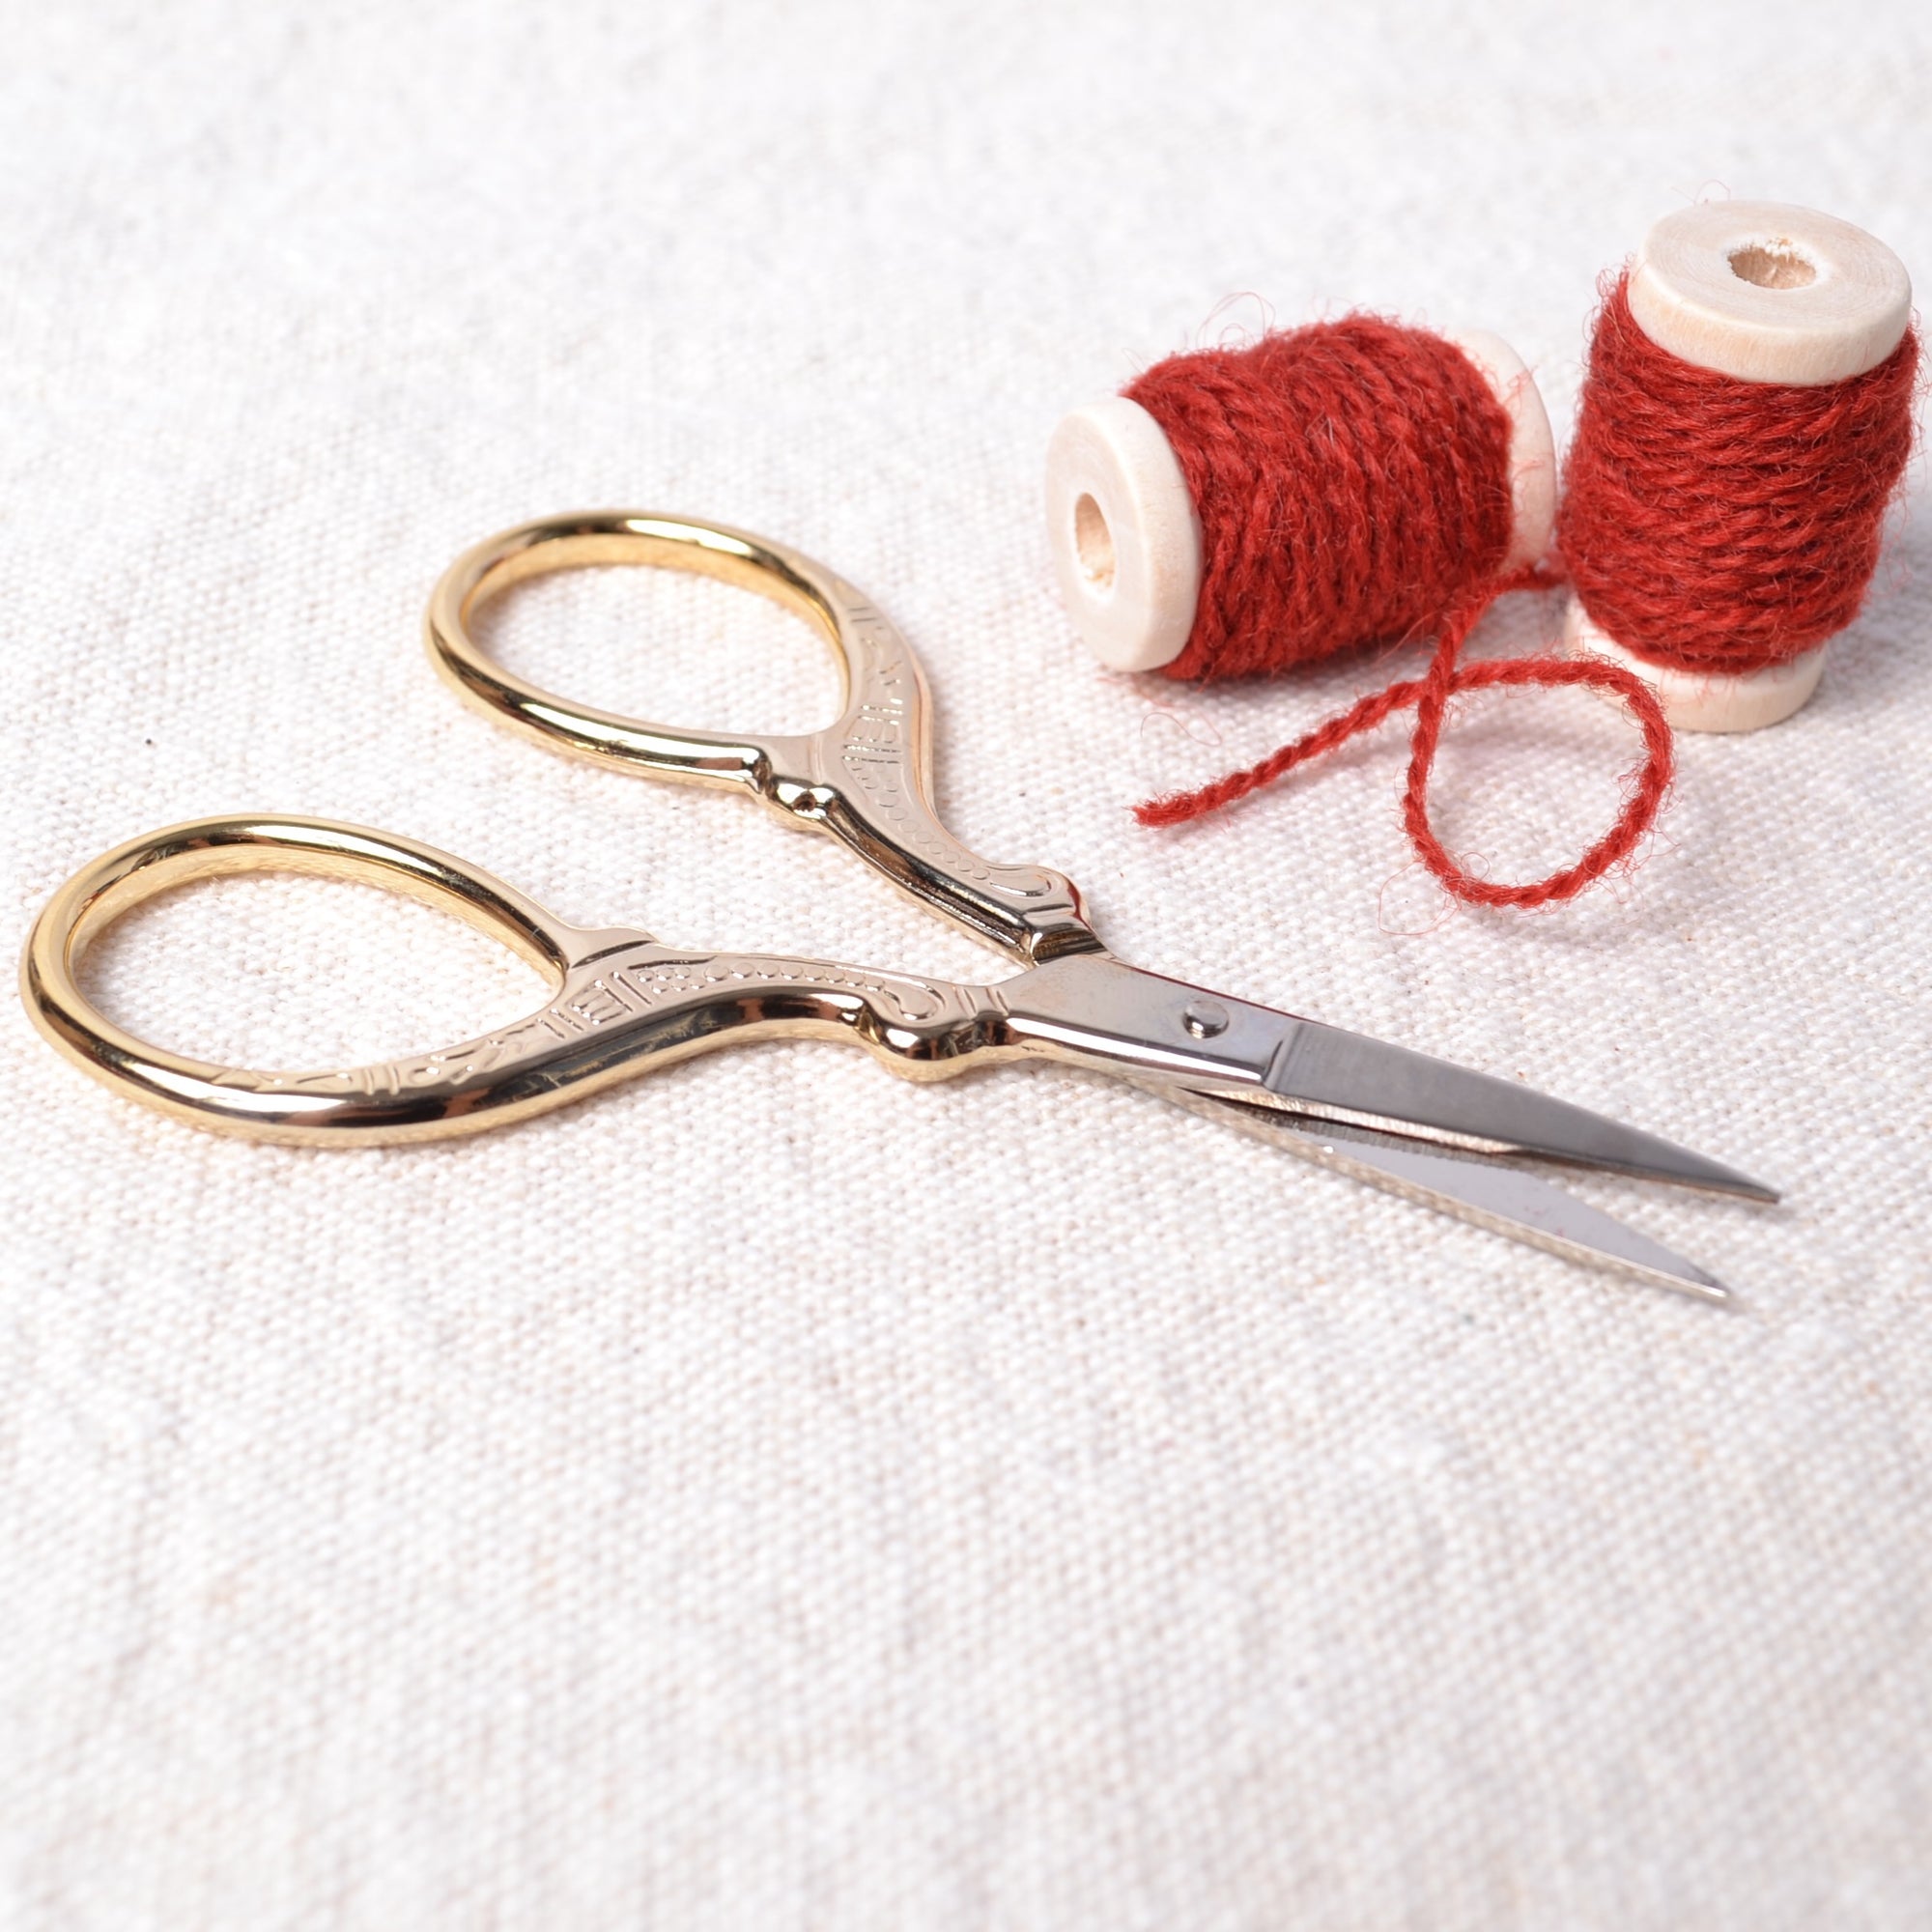 small hand sewing scissors